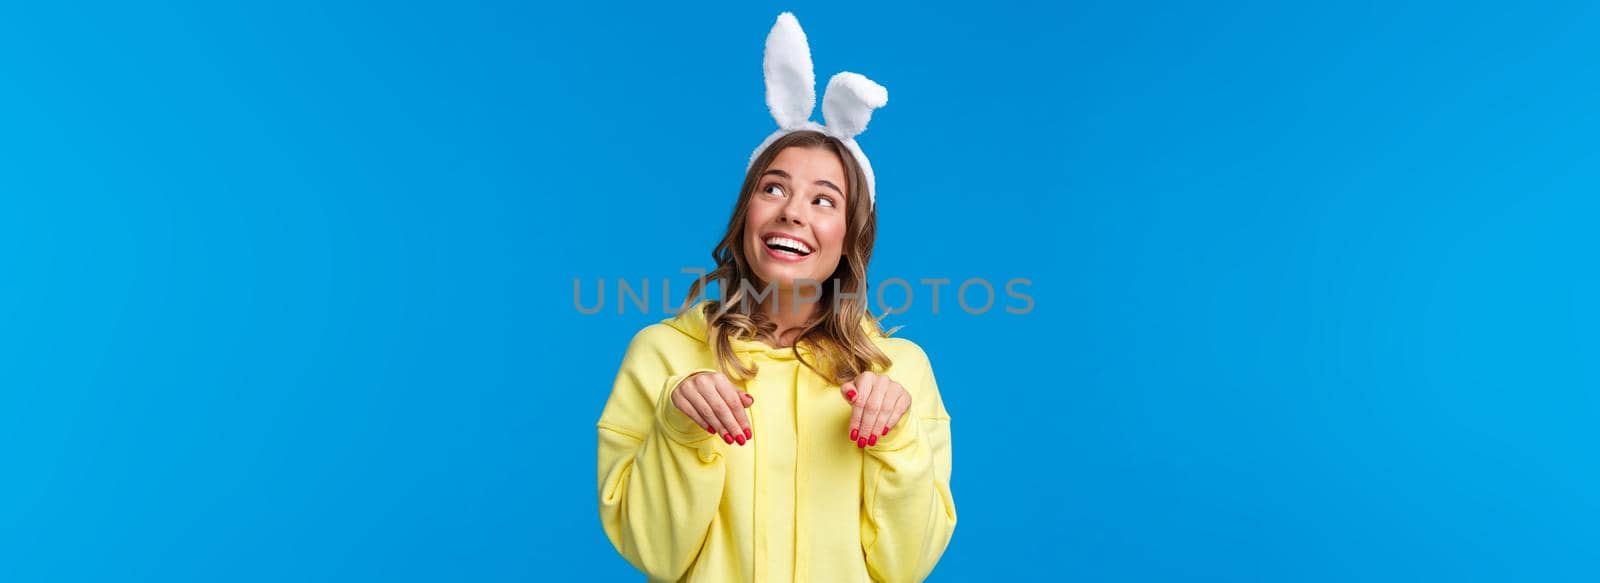 Holidays, traditions and celebration concept. Dreamy and cute young woman smiling lovely with rabbit ears, look upbeat upper right corner grinning make paws gesture, blue background by Benzoix